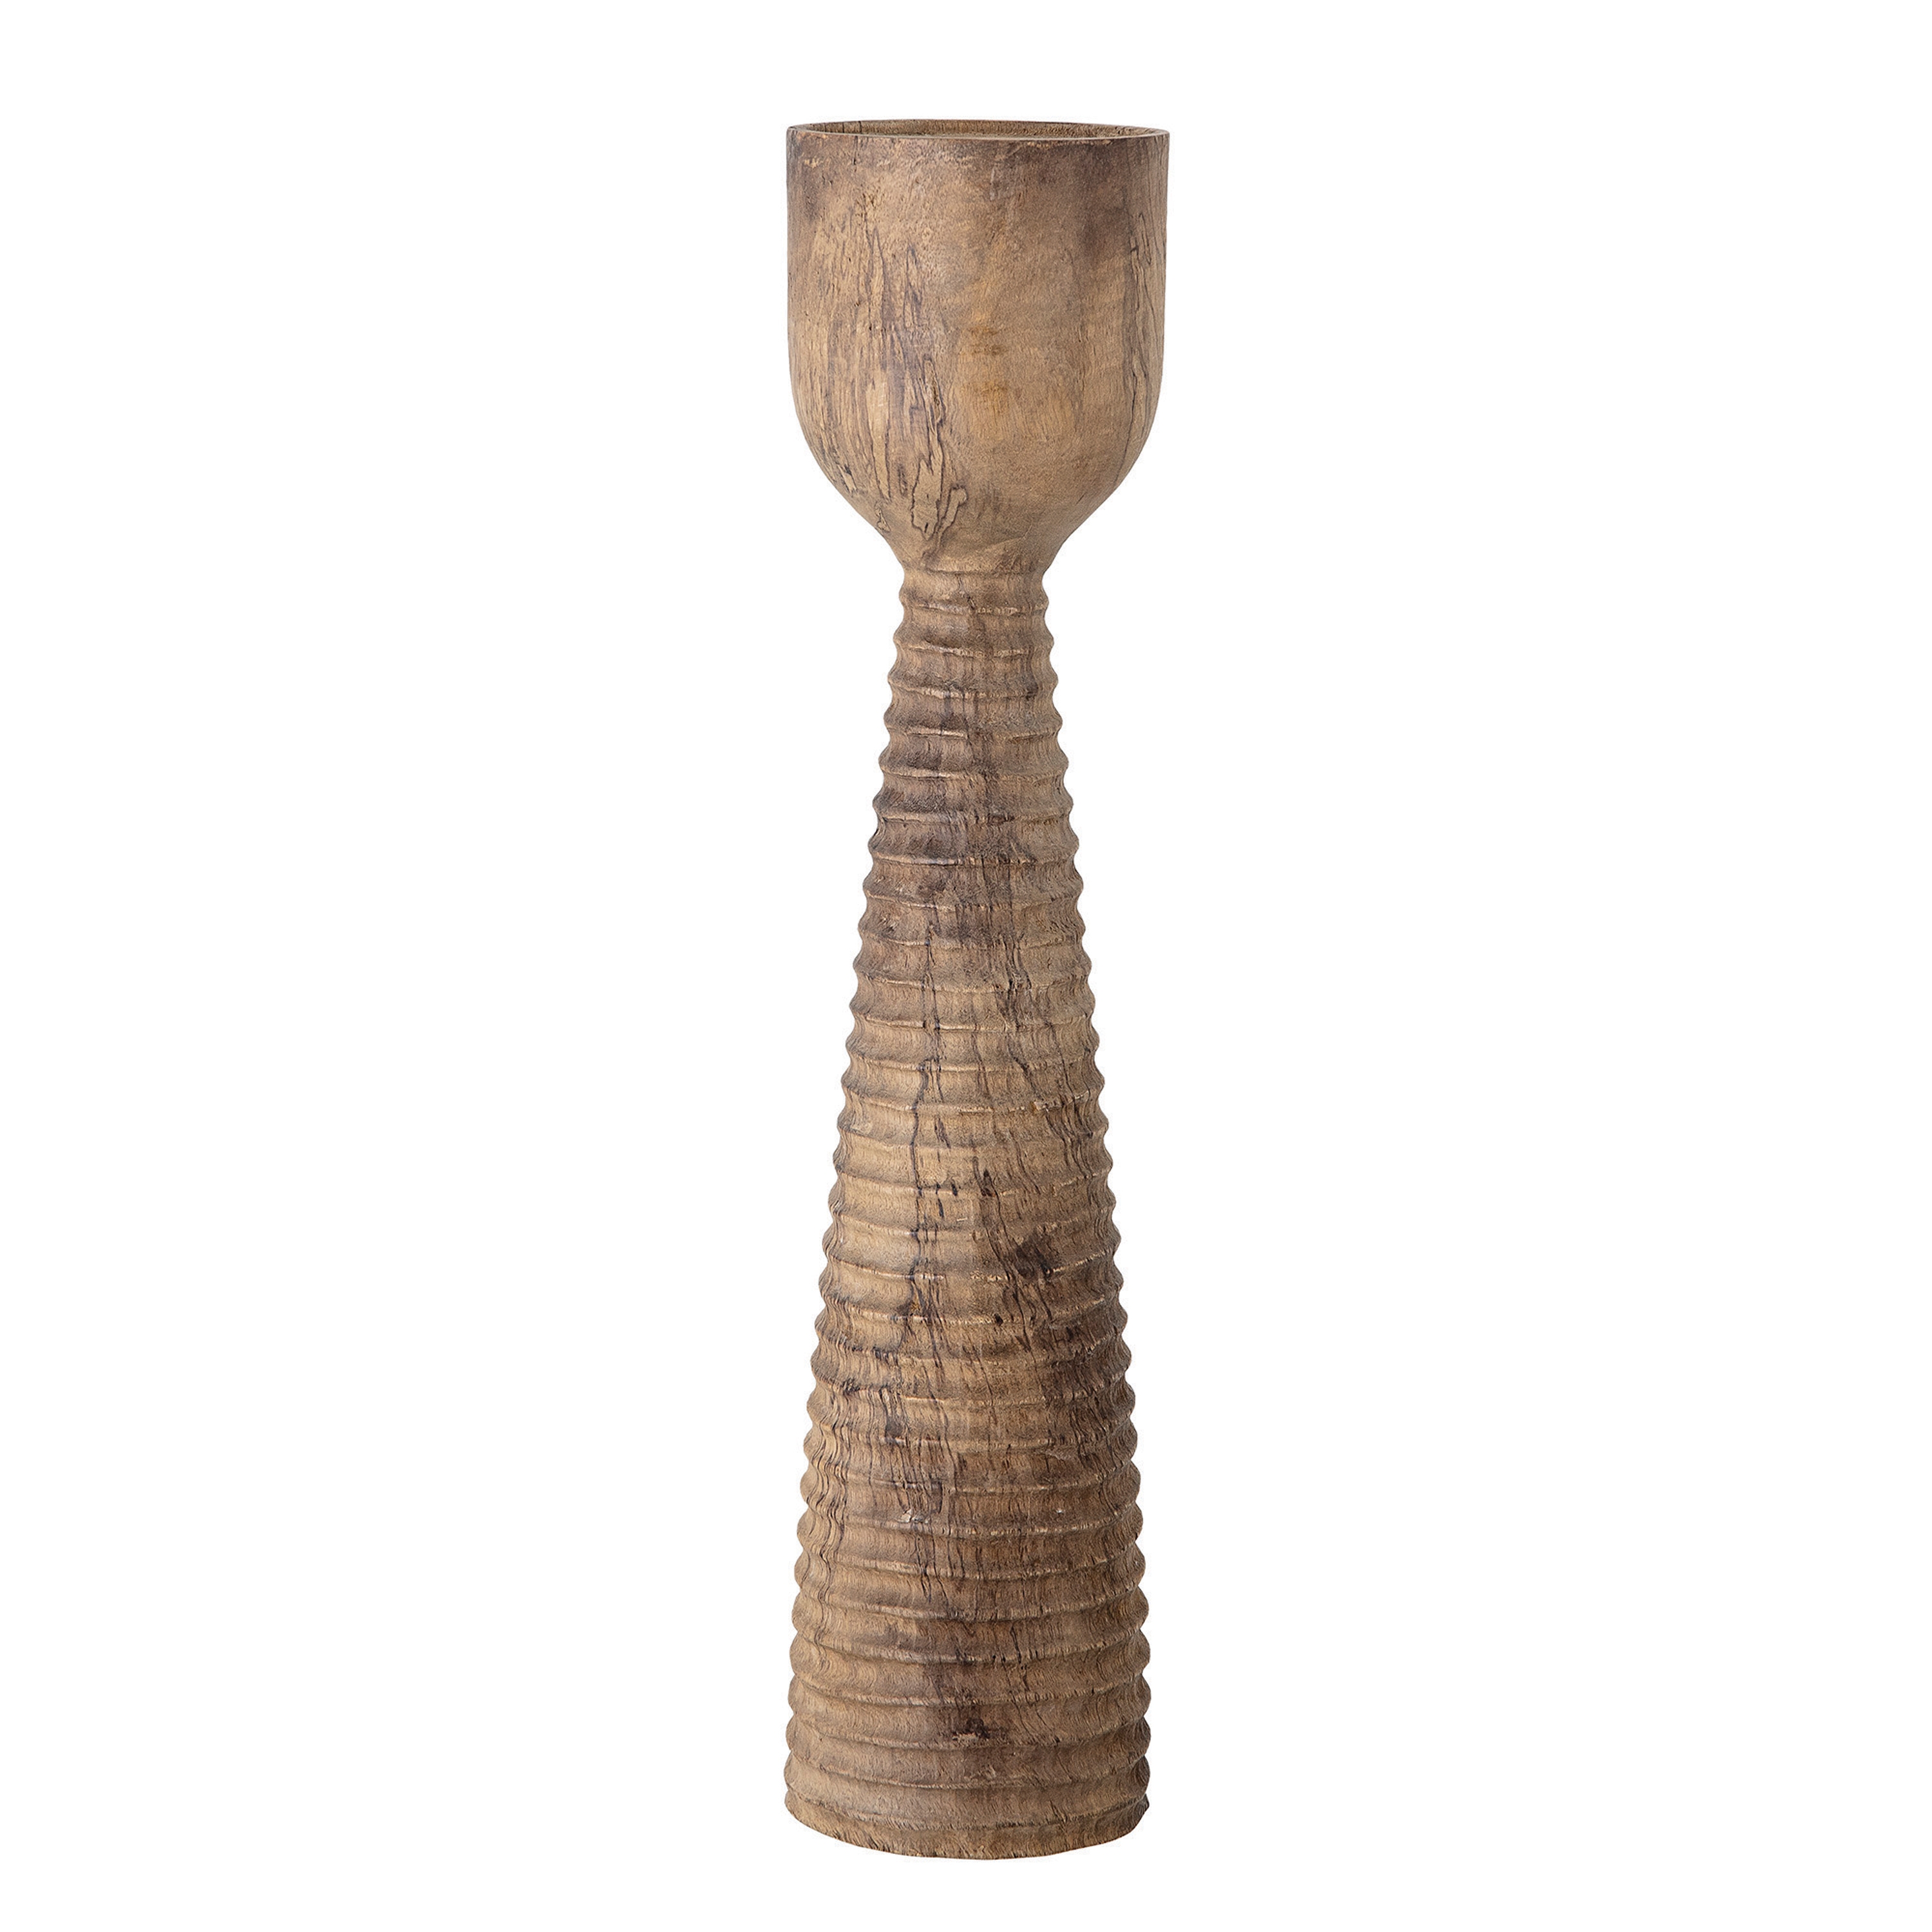 24"H Hand-Carved Mango Wood Candleholder with Ribbed Design (Holds 4" Pillar Candle) - Image 0